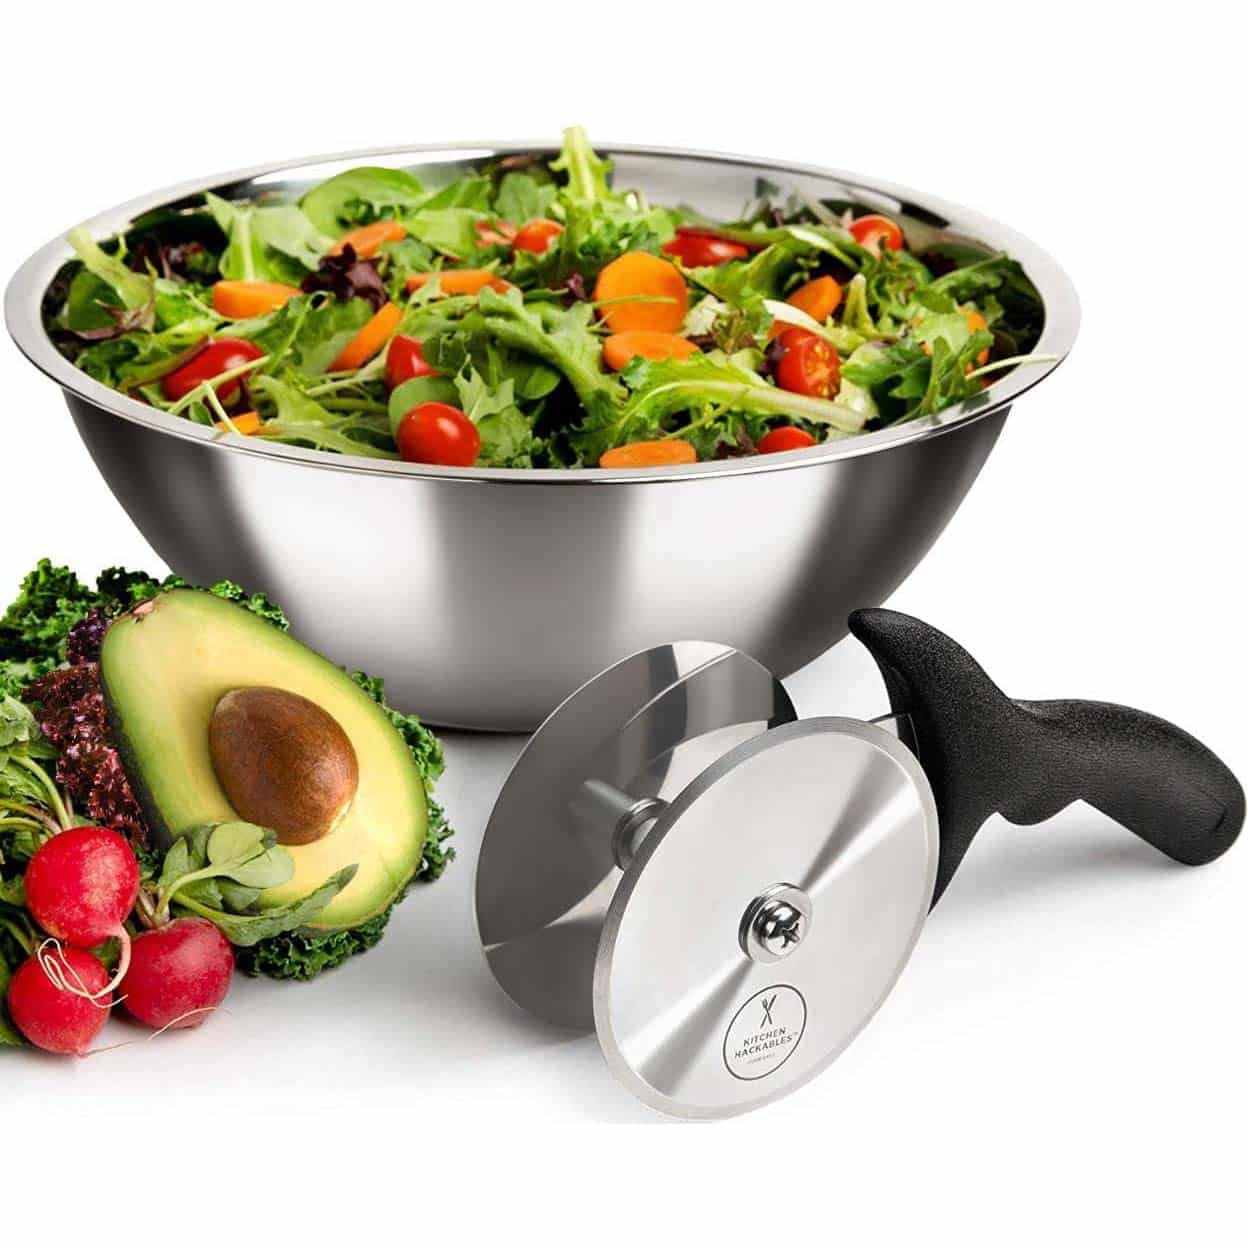 Stainless Steel Salad Cutter Bowl with Chef Grade Mezzaluna